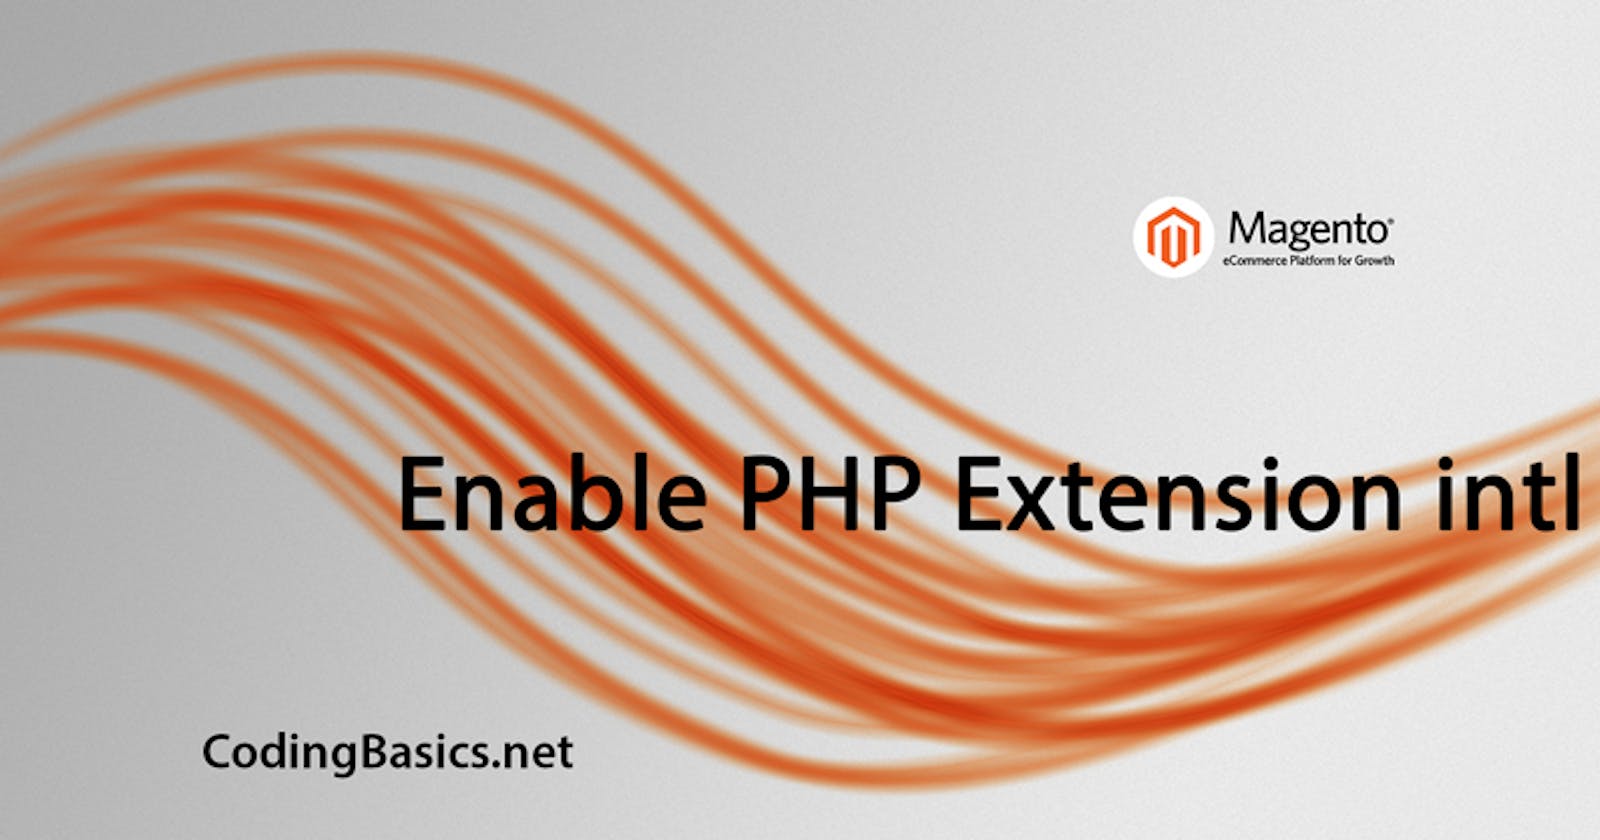 How to Enable PHP Extension intl Magento 2